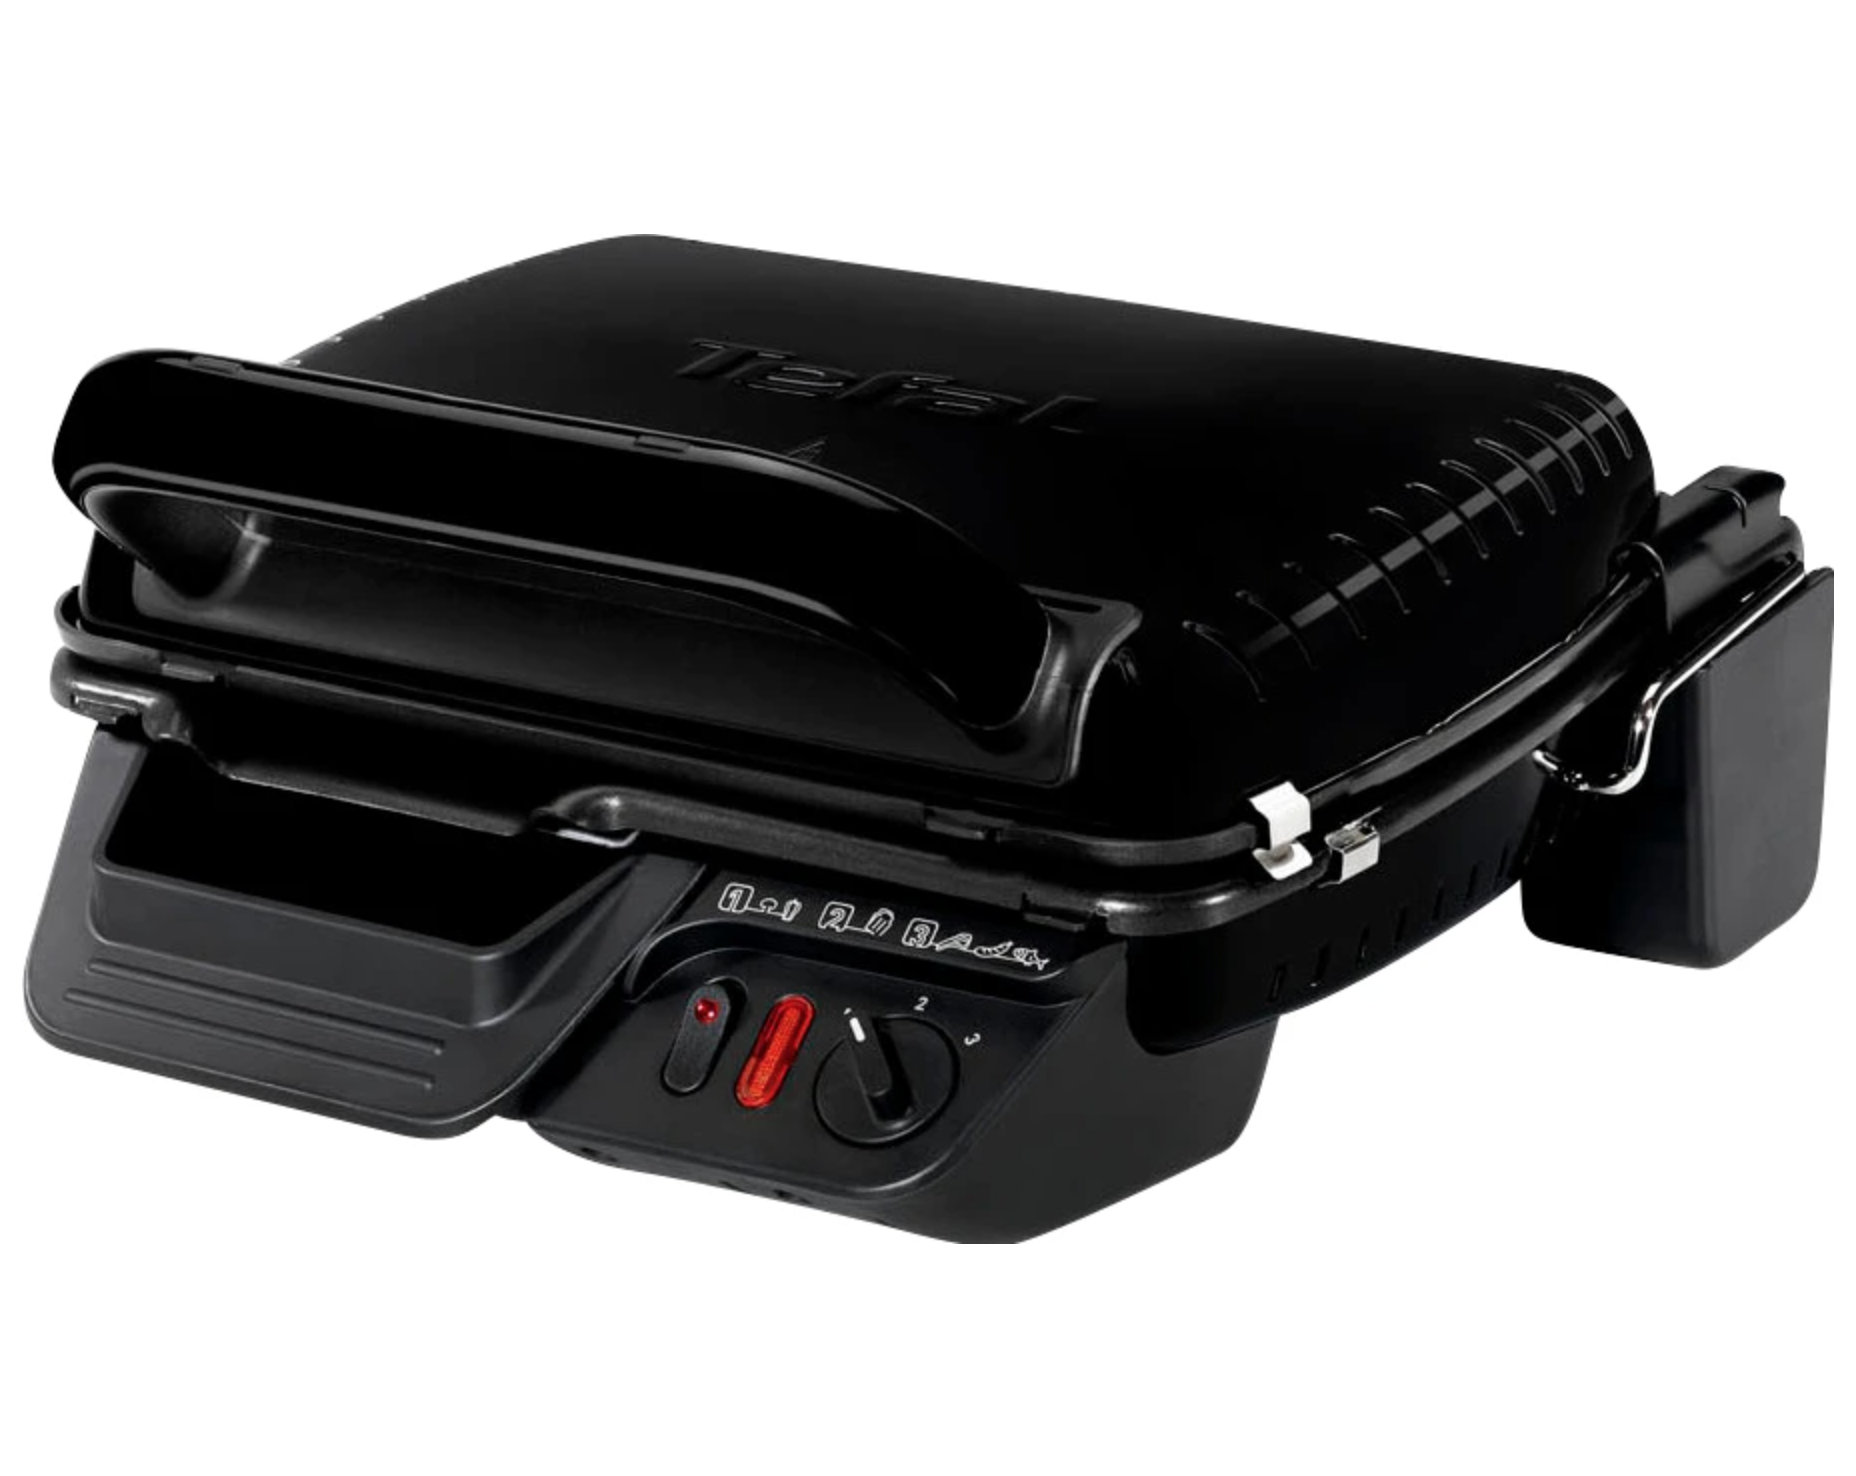 Tefal Grill Ultracompact Grill GC3058